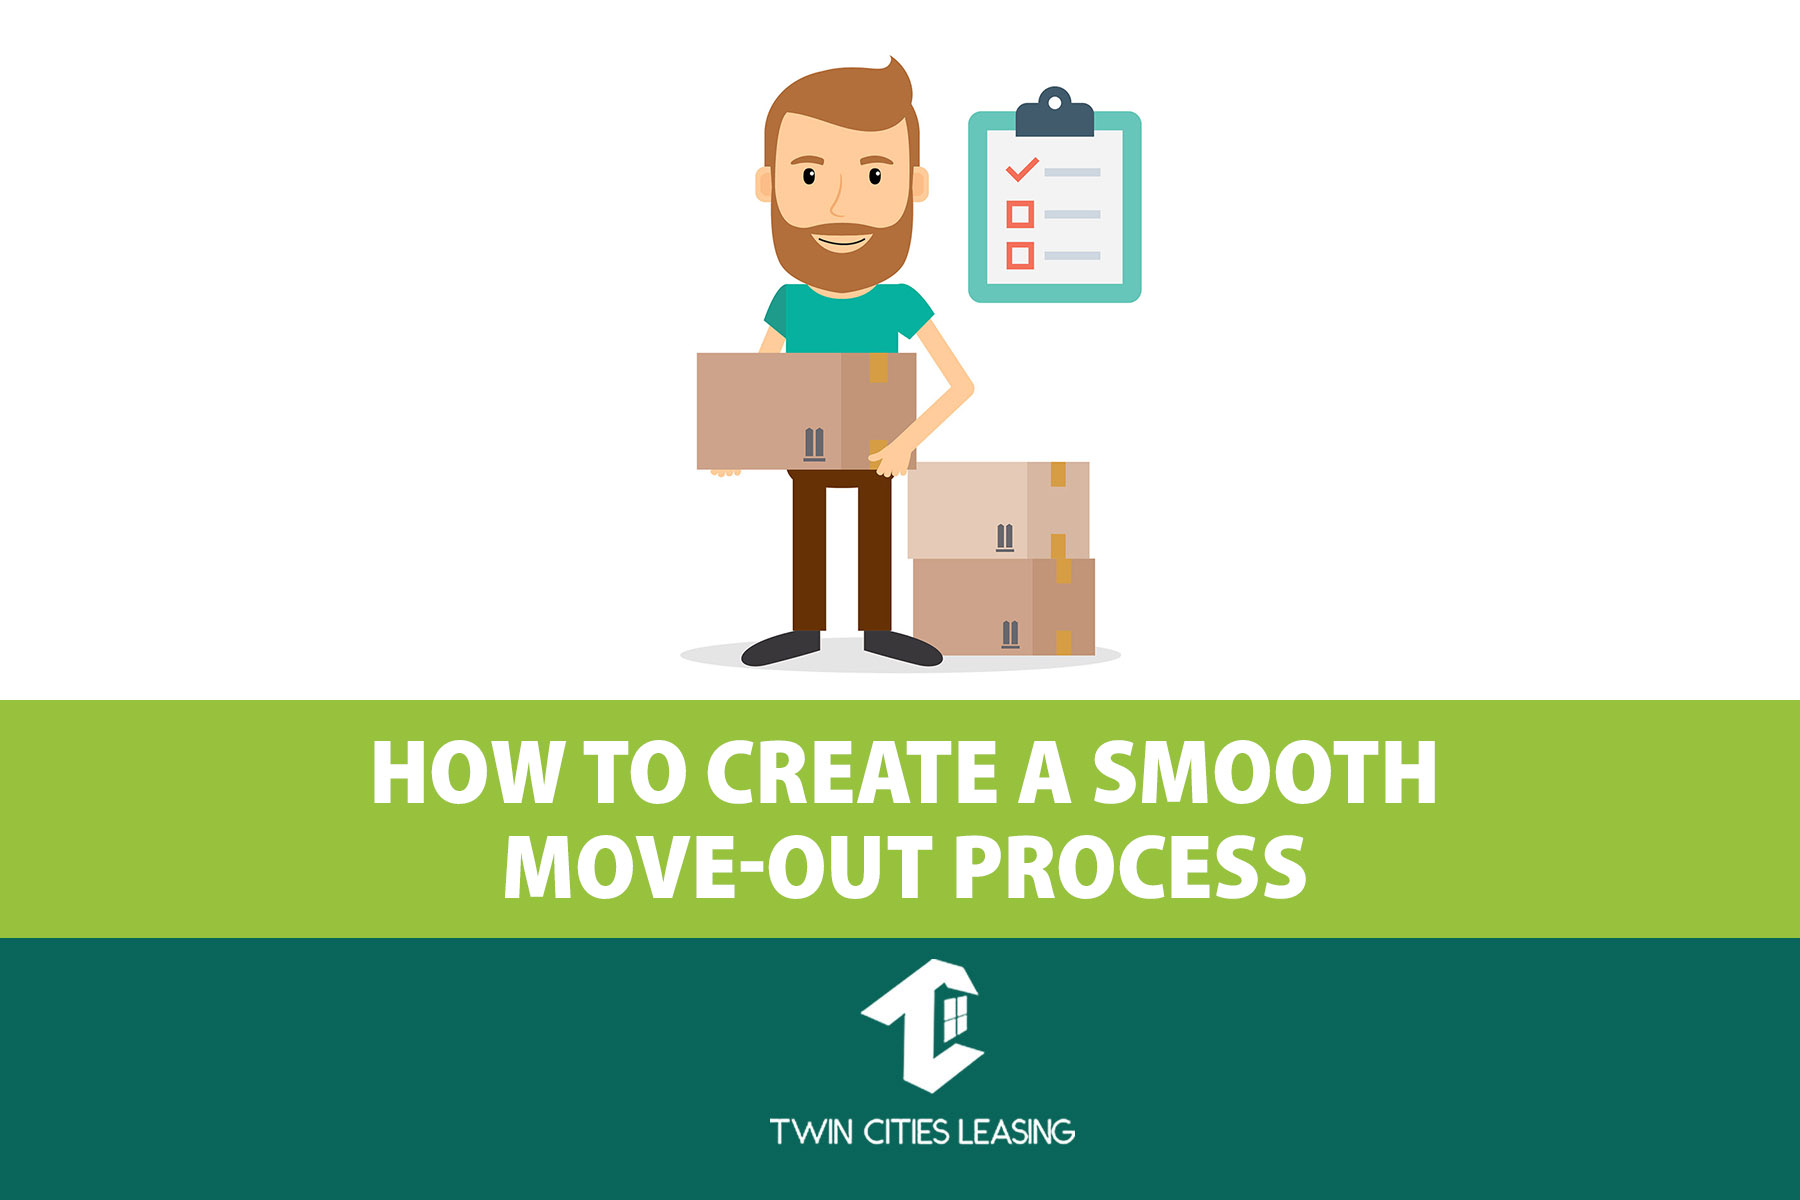 How to Create a Smooth Move-Out Process